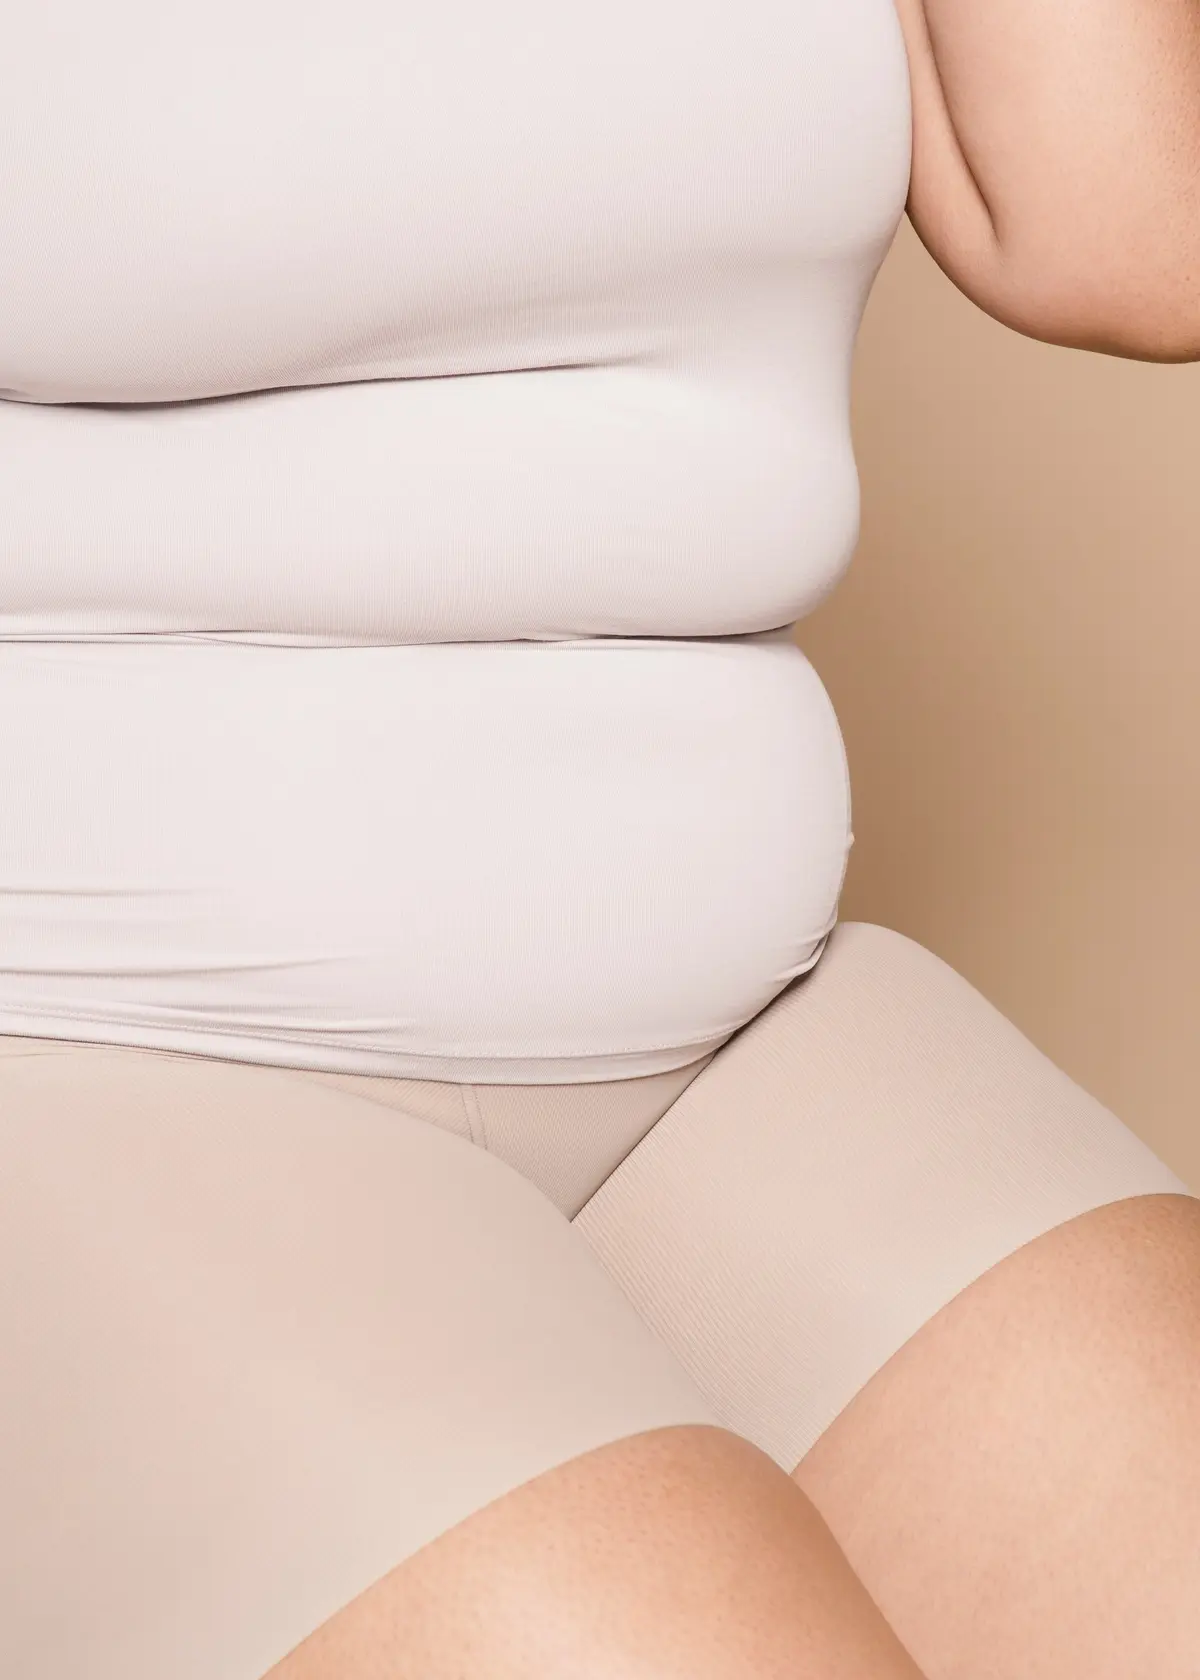 prevent thigh chafing with shapewear